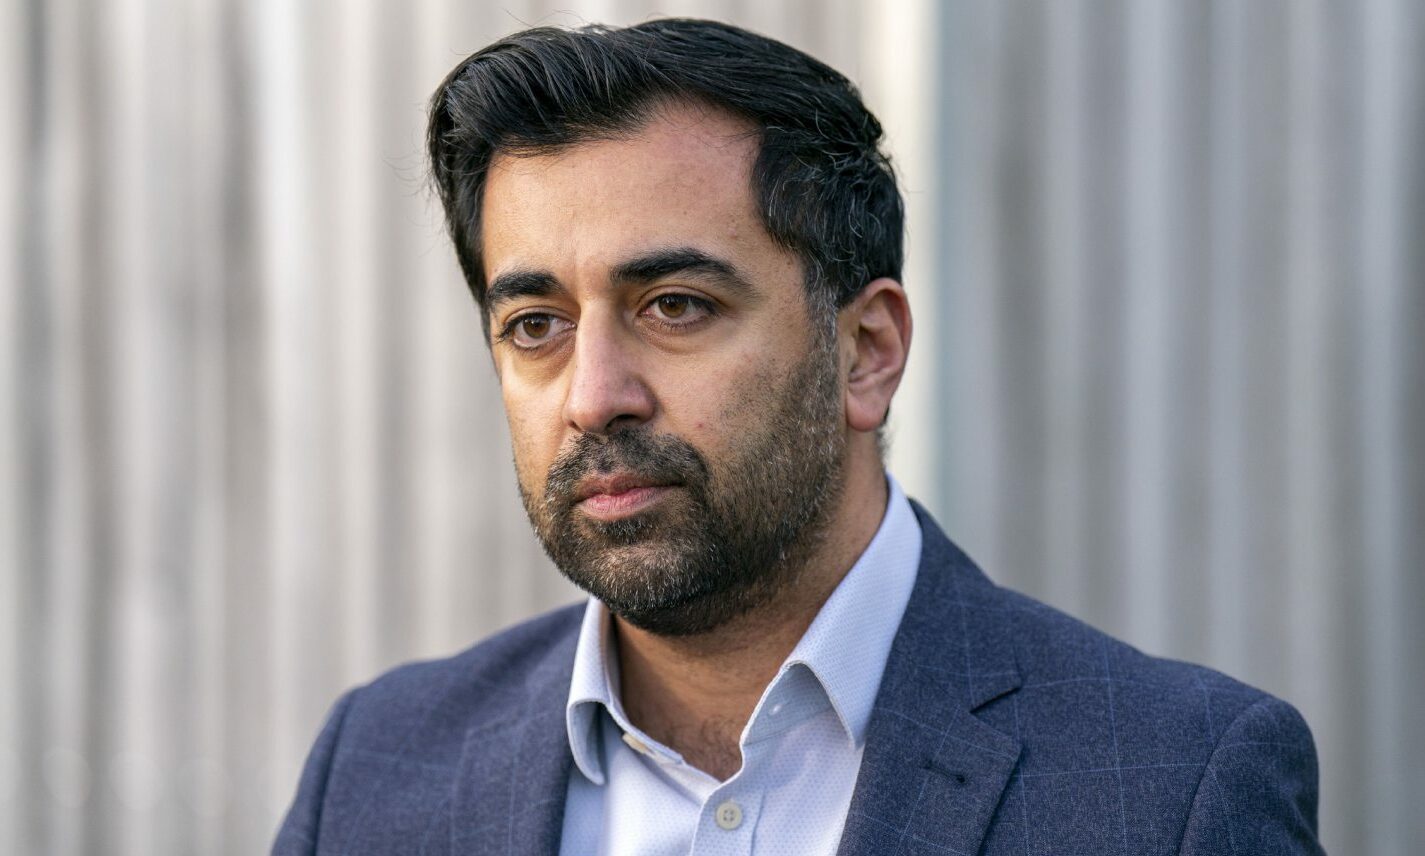 Humza Yousaf wants to increase patient access, without giving GPs more work. Image: Jane Barlow/PA Wire